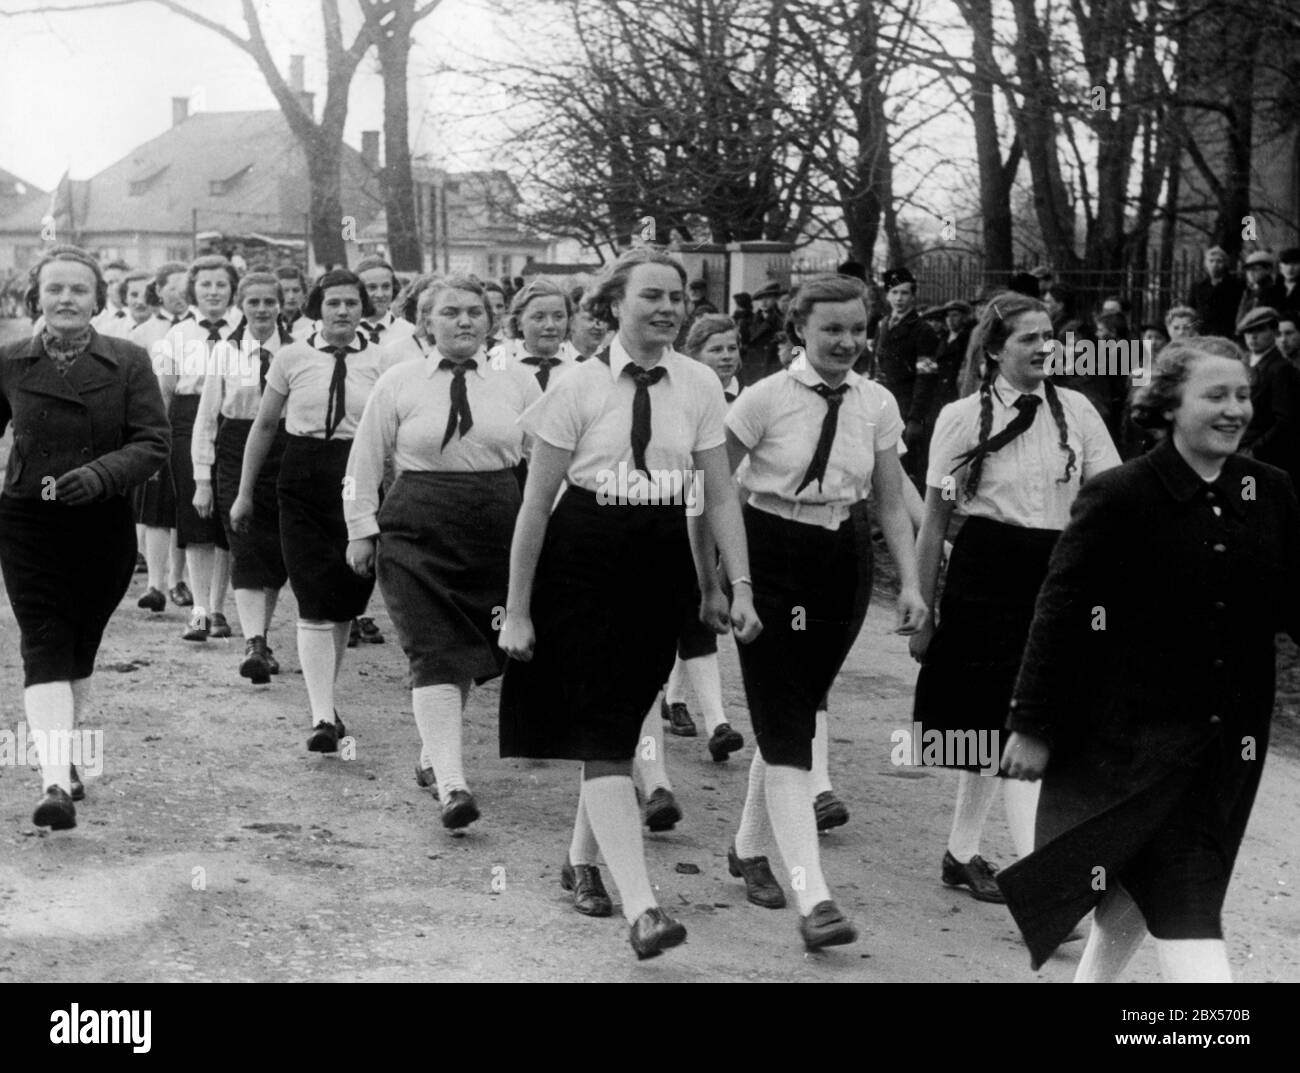 A group of German girls in Kaesmark marches to the gym. In the background there is a boy with a swastika armband. Stock Photo